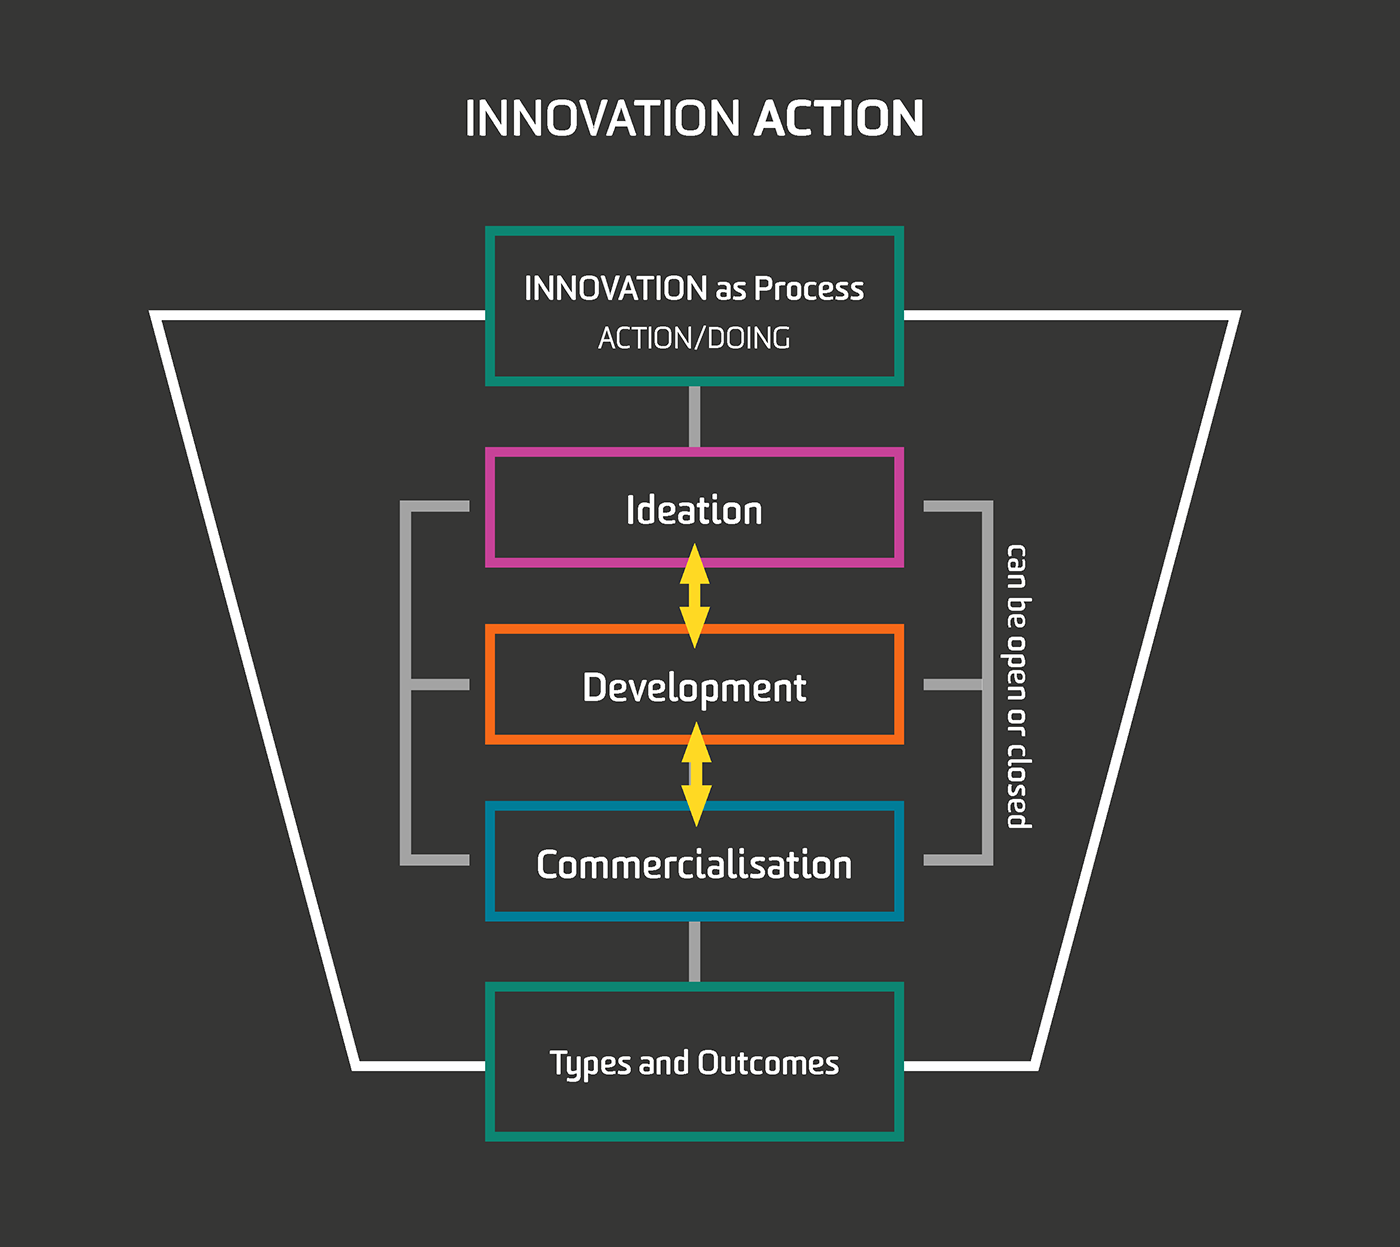 Stages of the Innovation process